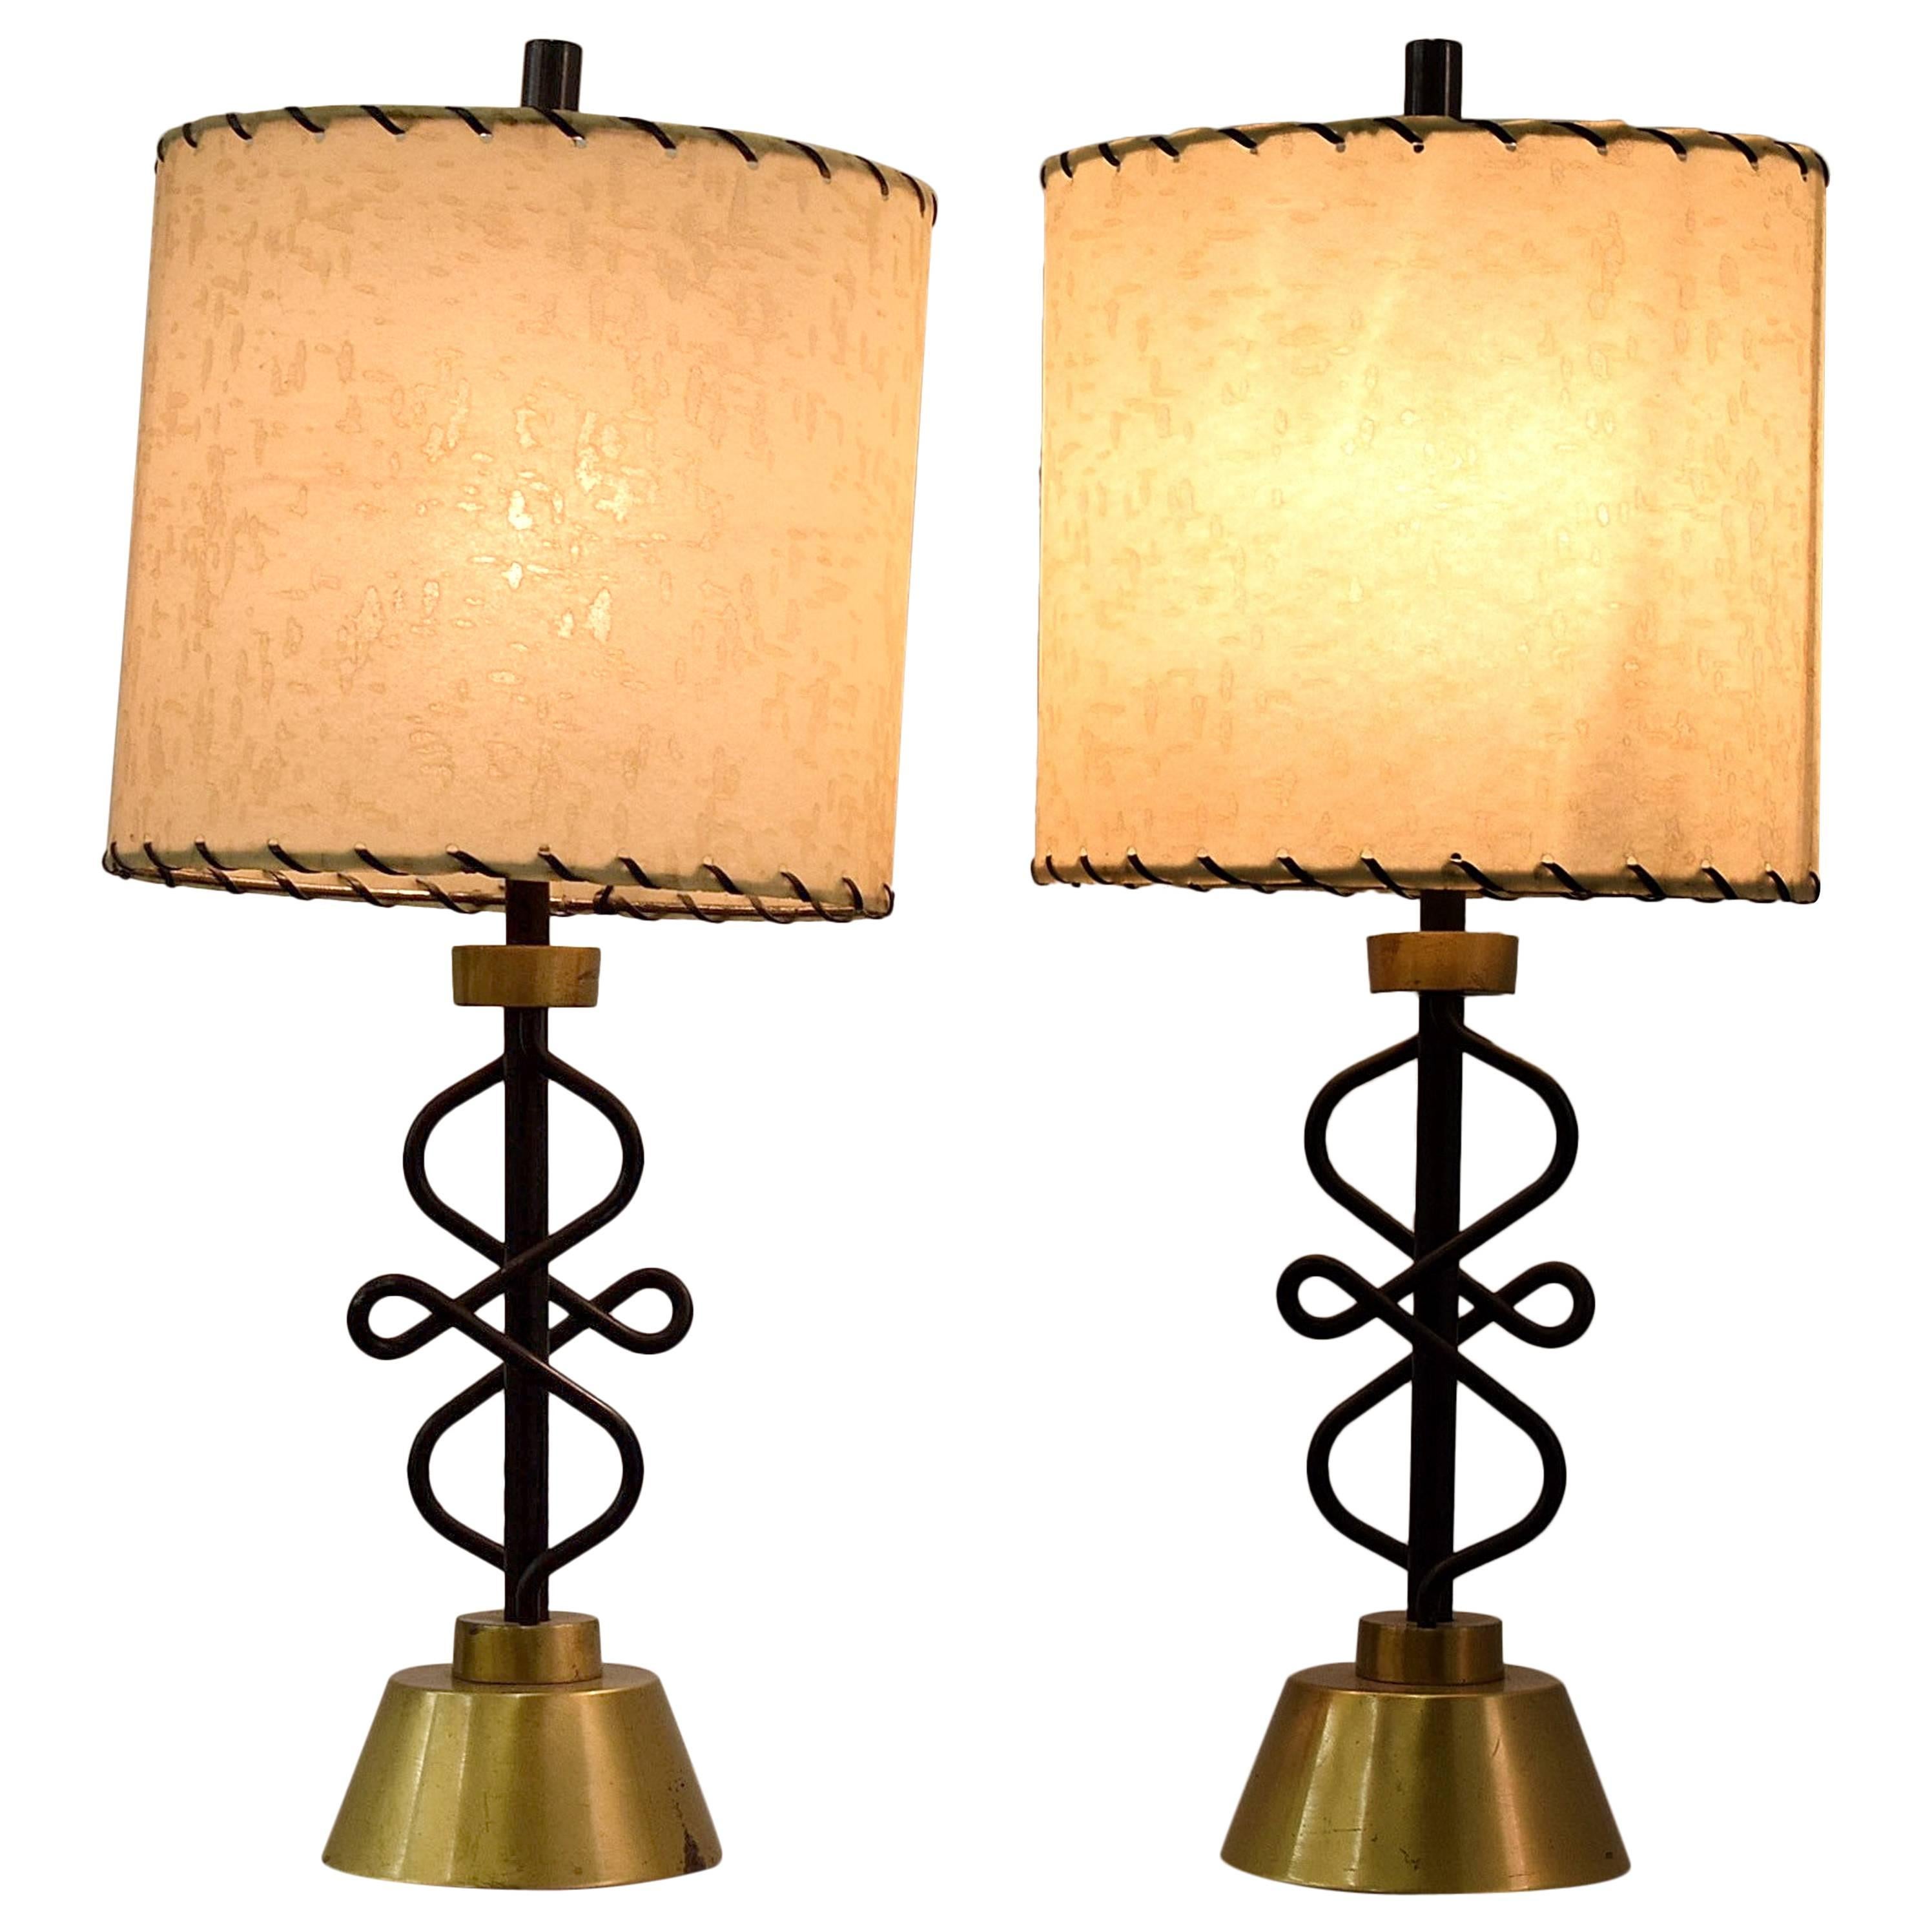 Two 1950s Table Lamps by Majestic, New York